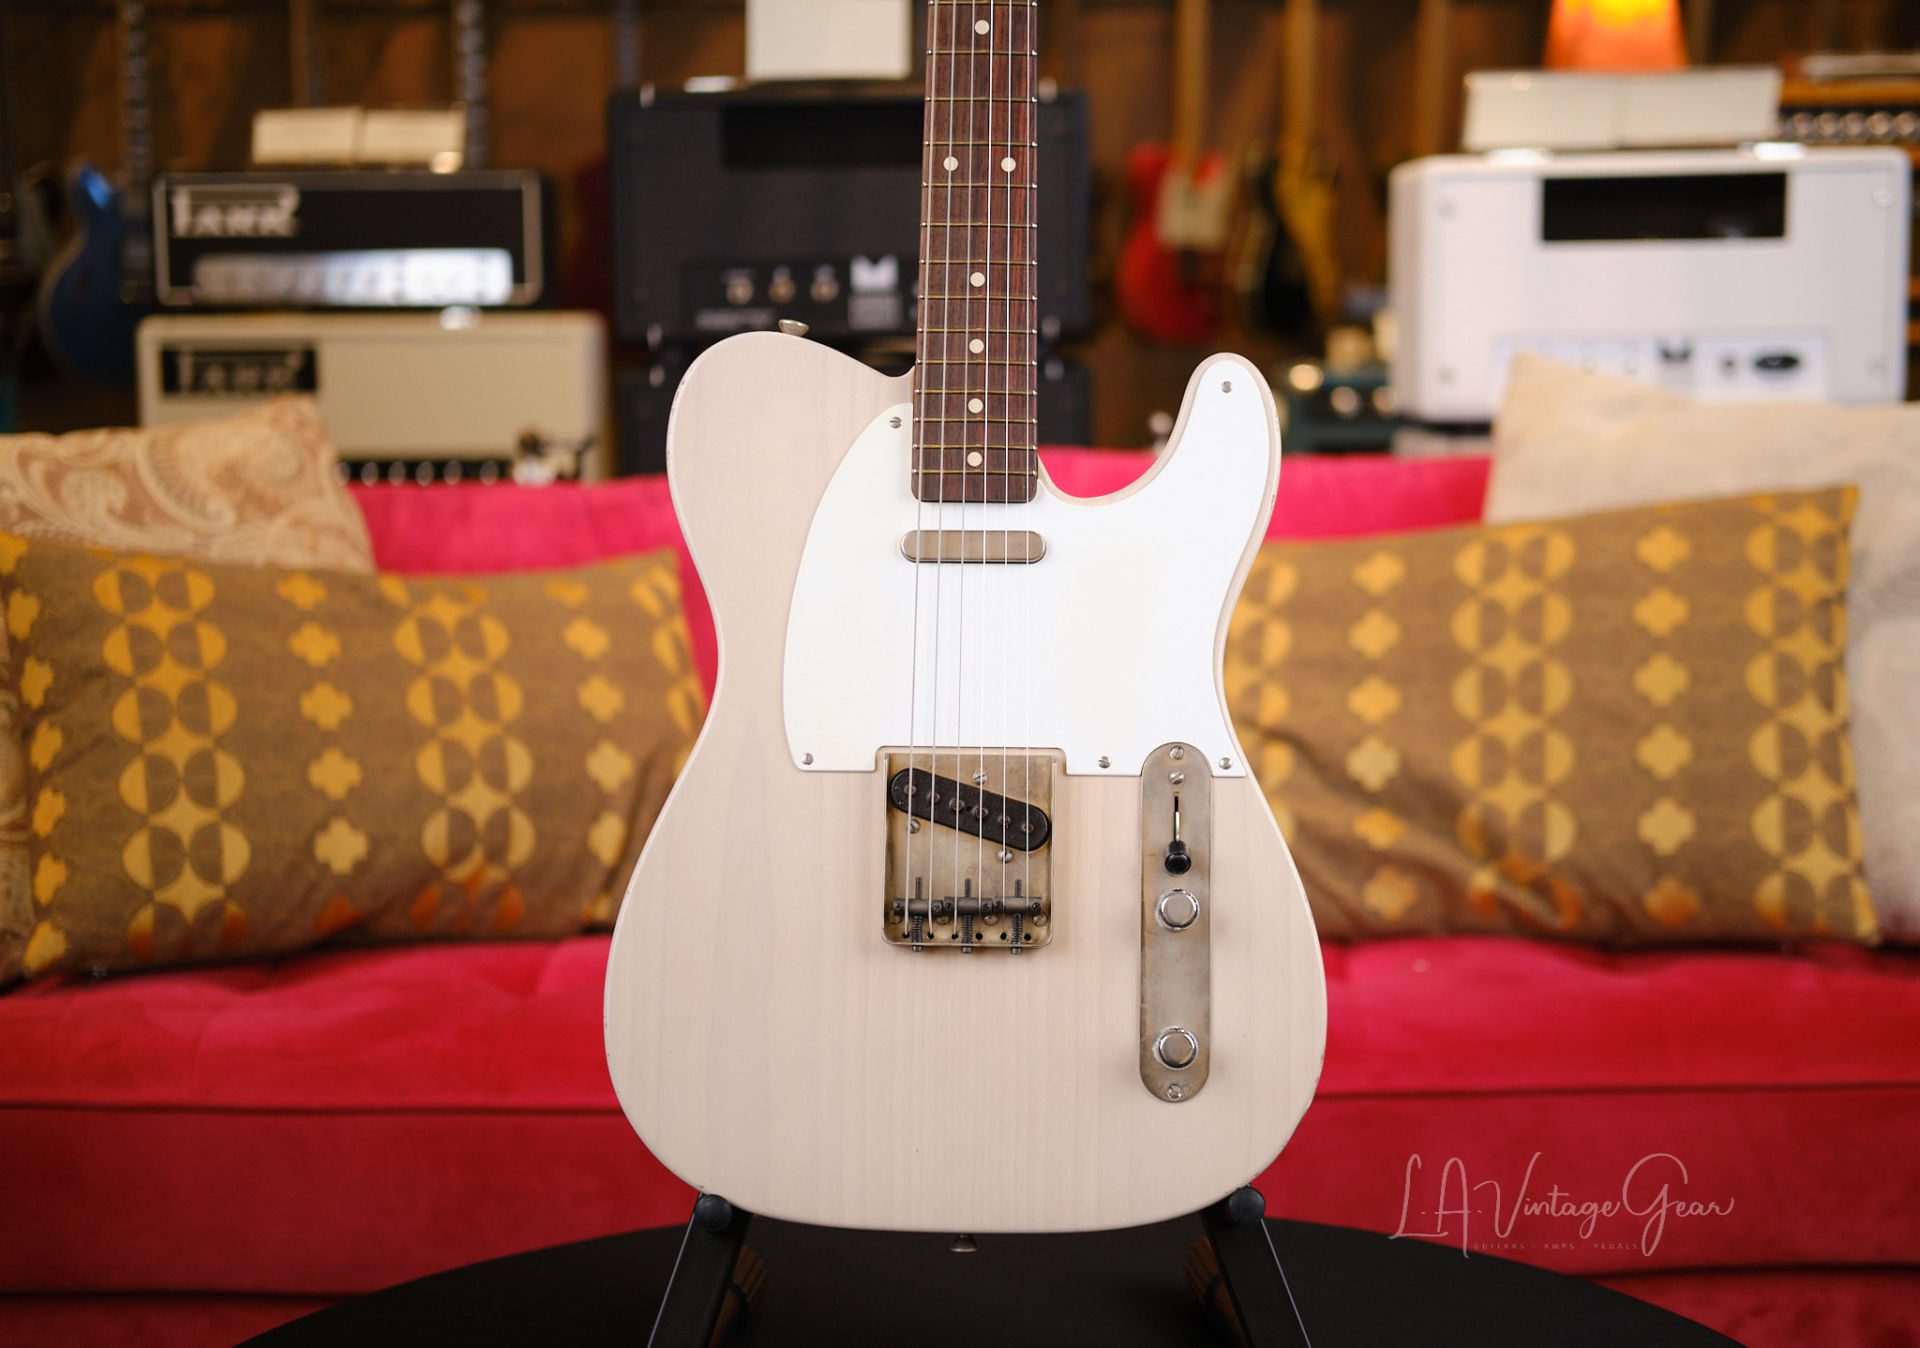 Xotic XTC1 T-Style Relic'd Electric Guitar - White Blonde Finish u0026 RW  Fingerboard #3072 - New Build!